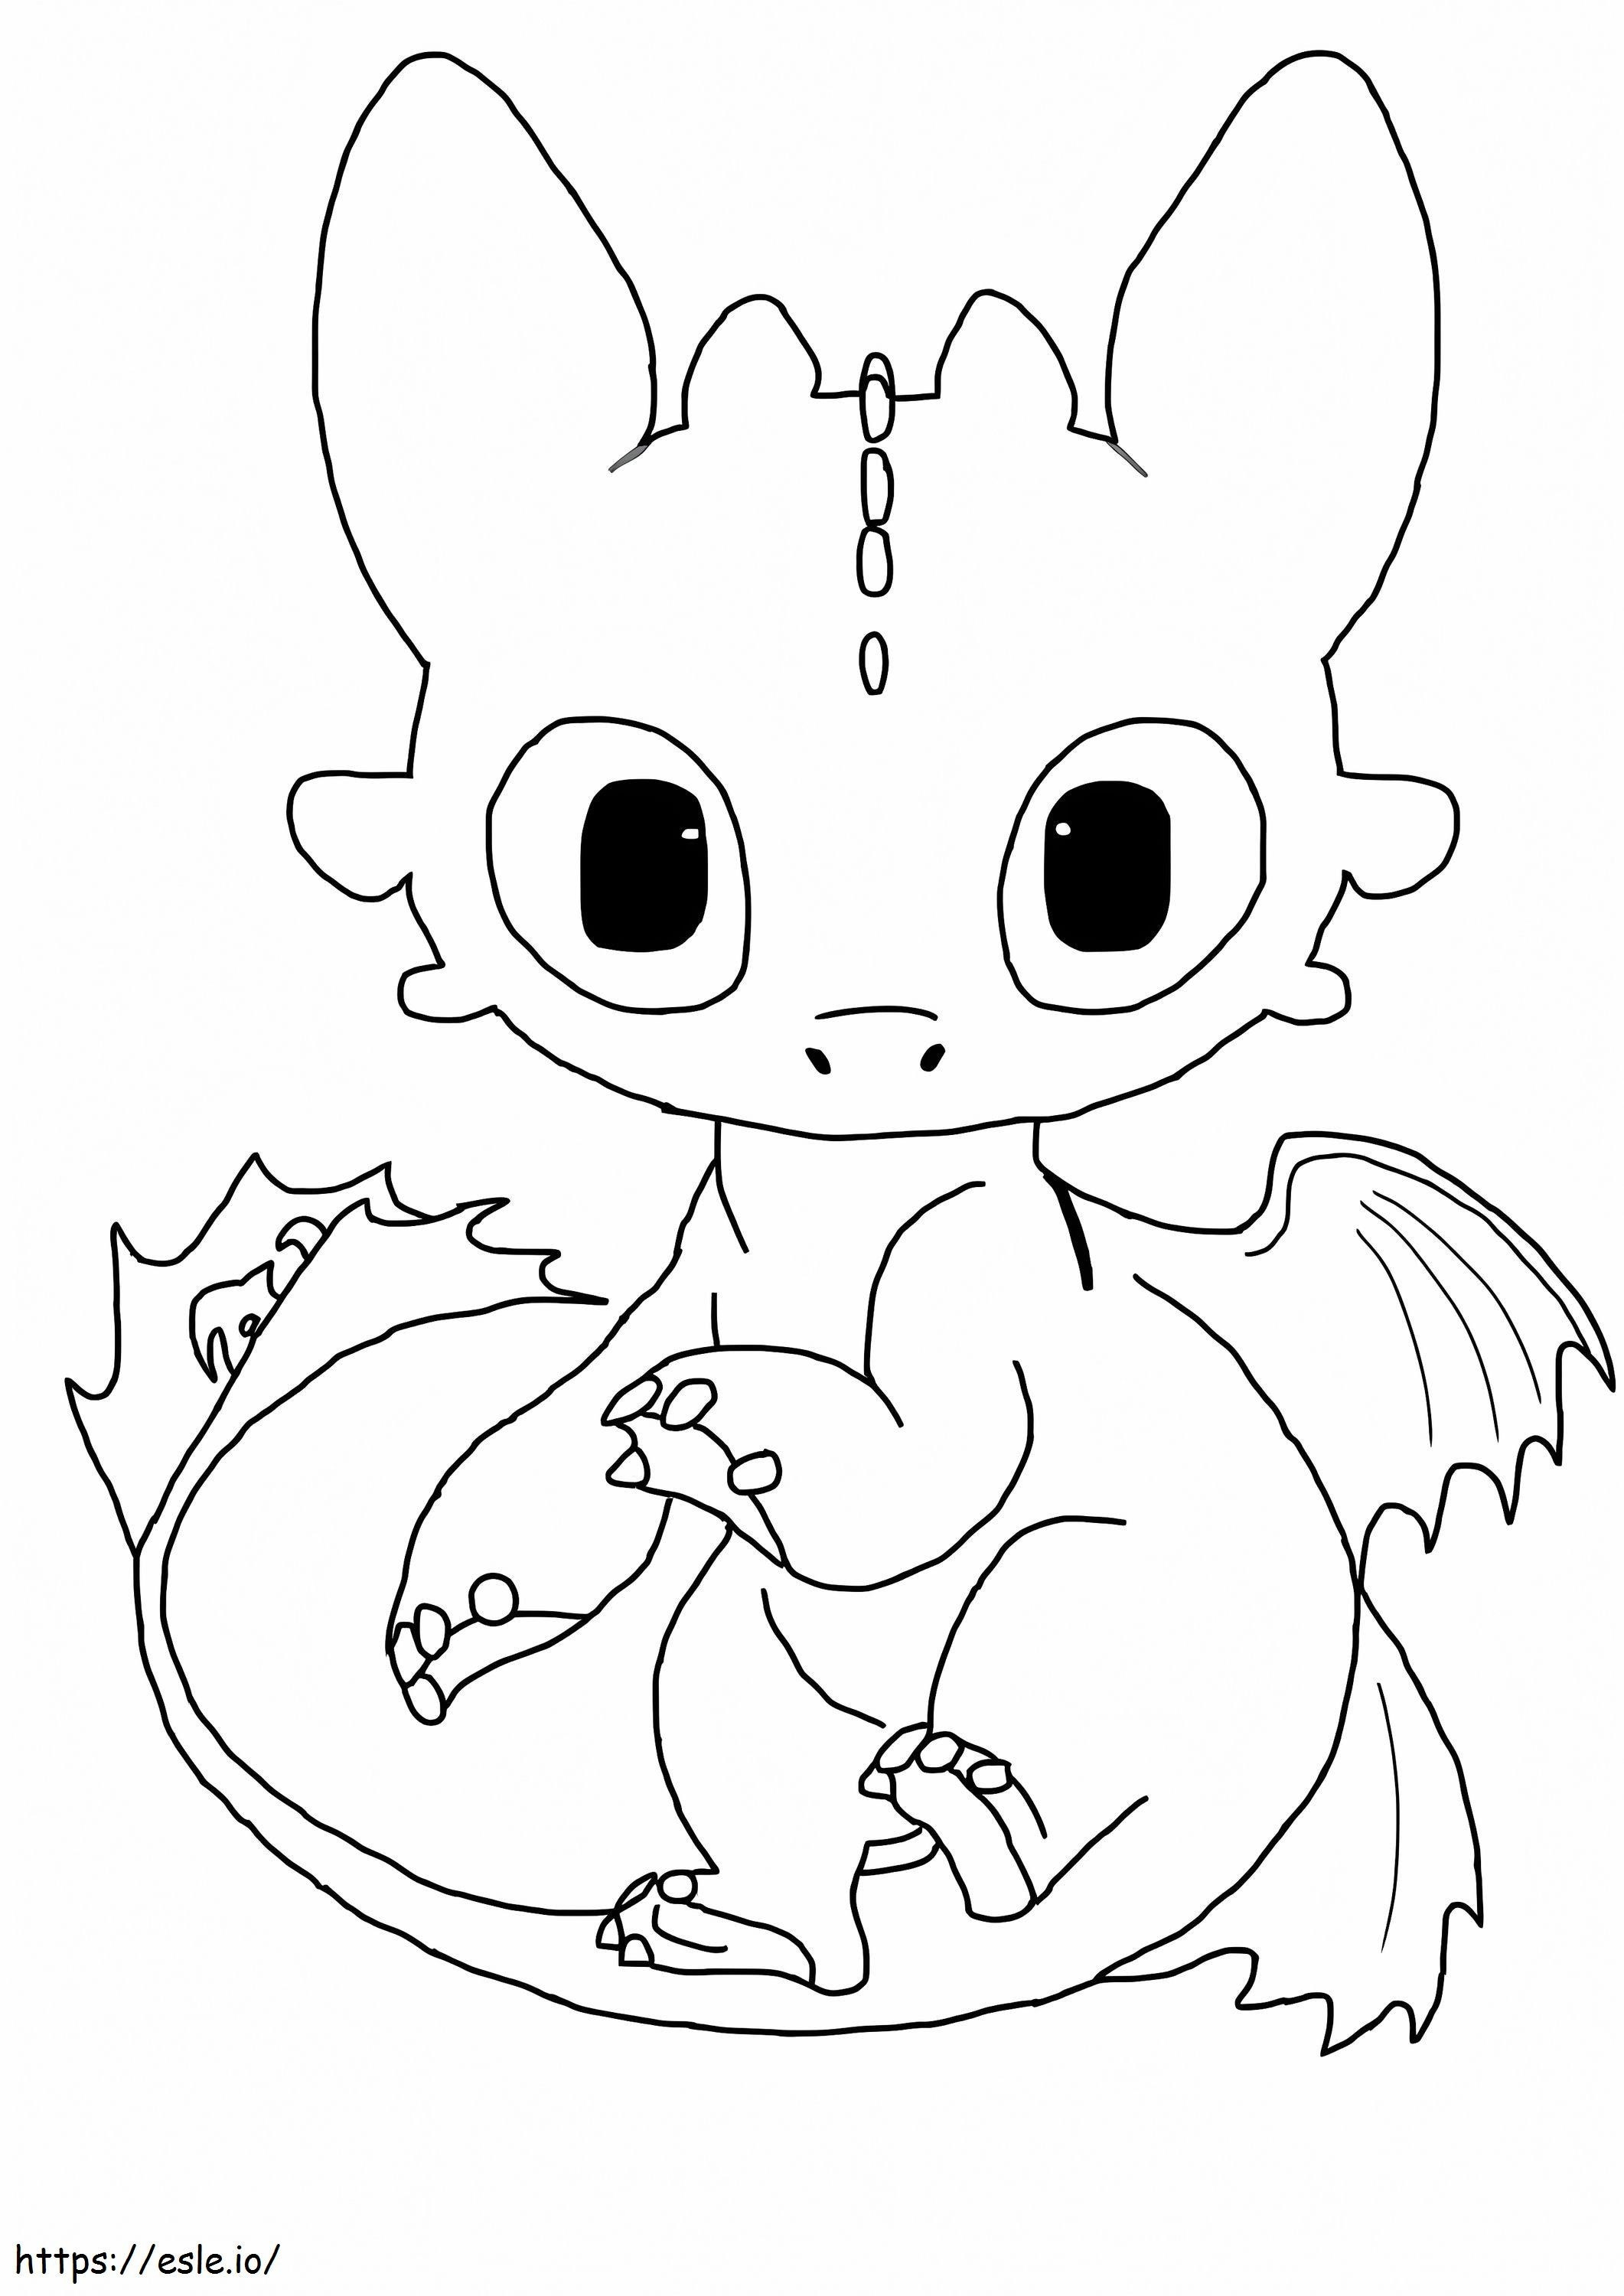 Toothless Chibi coloring page